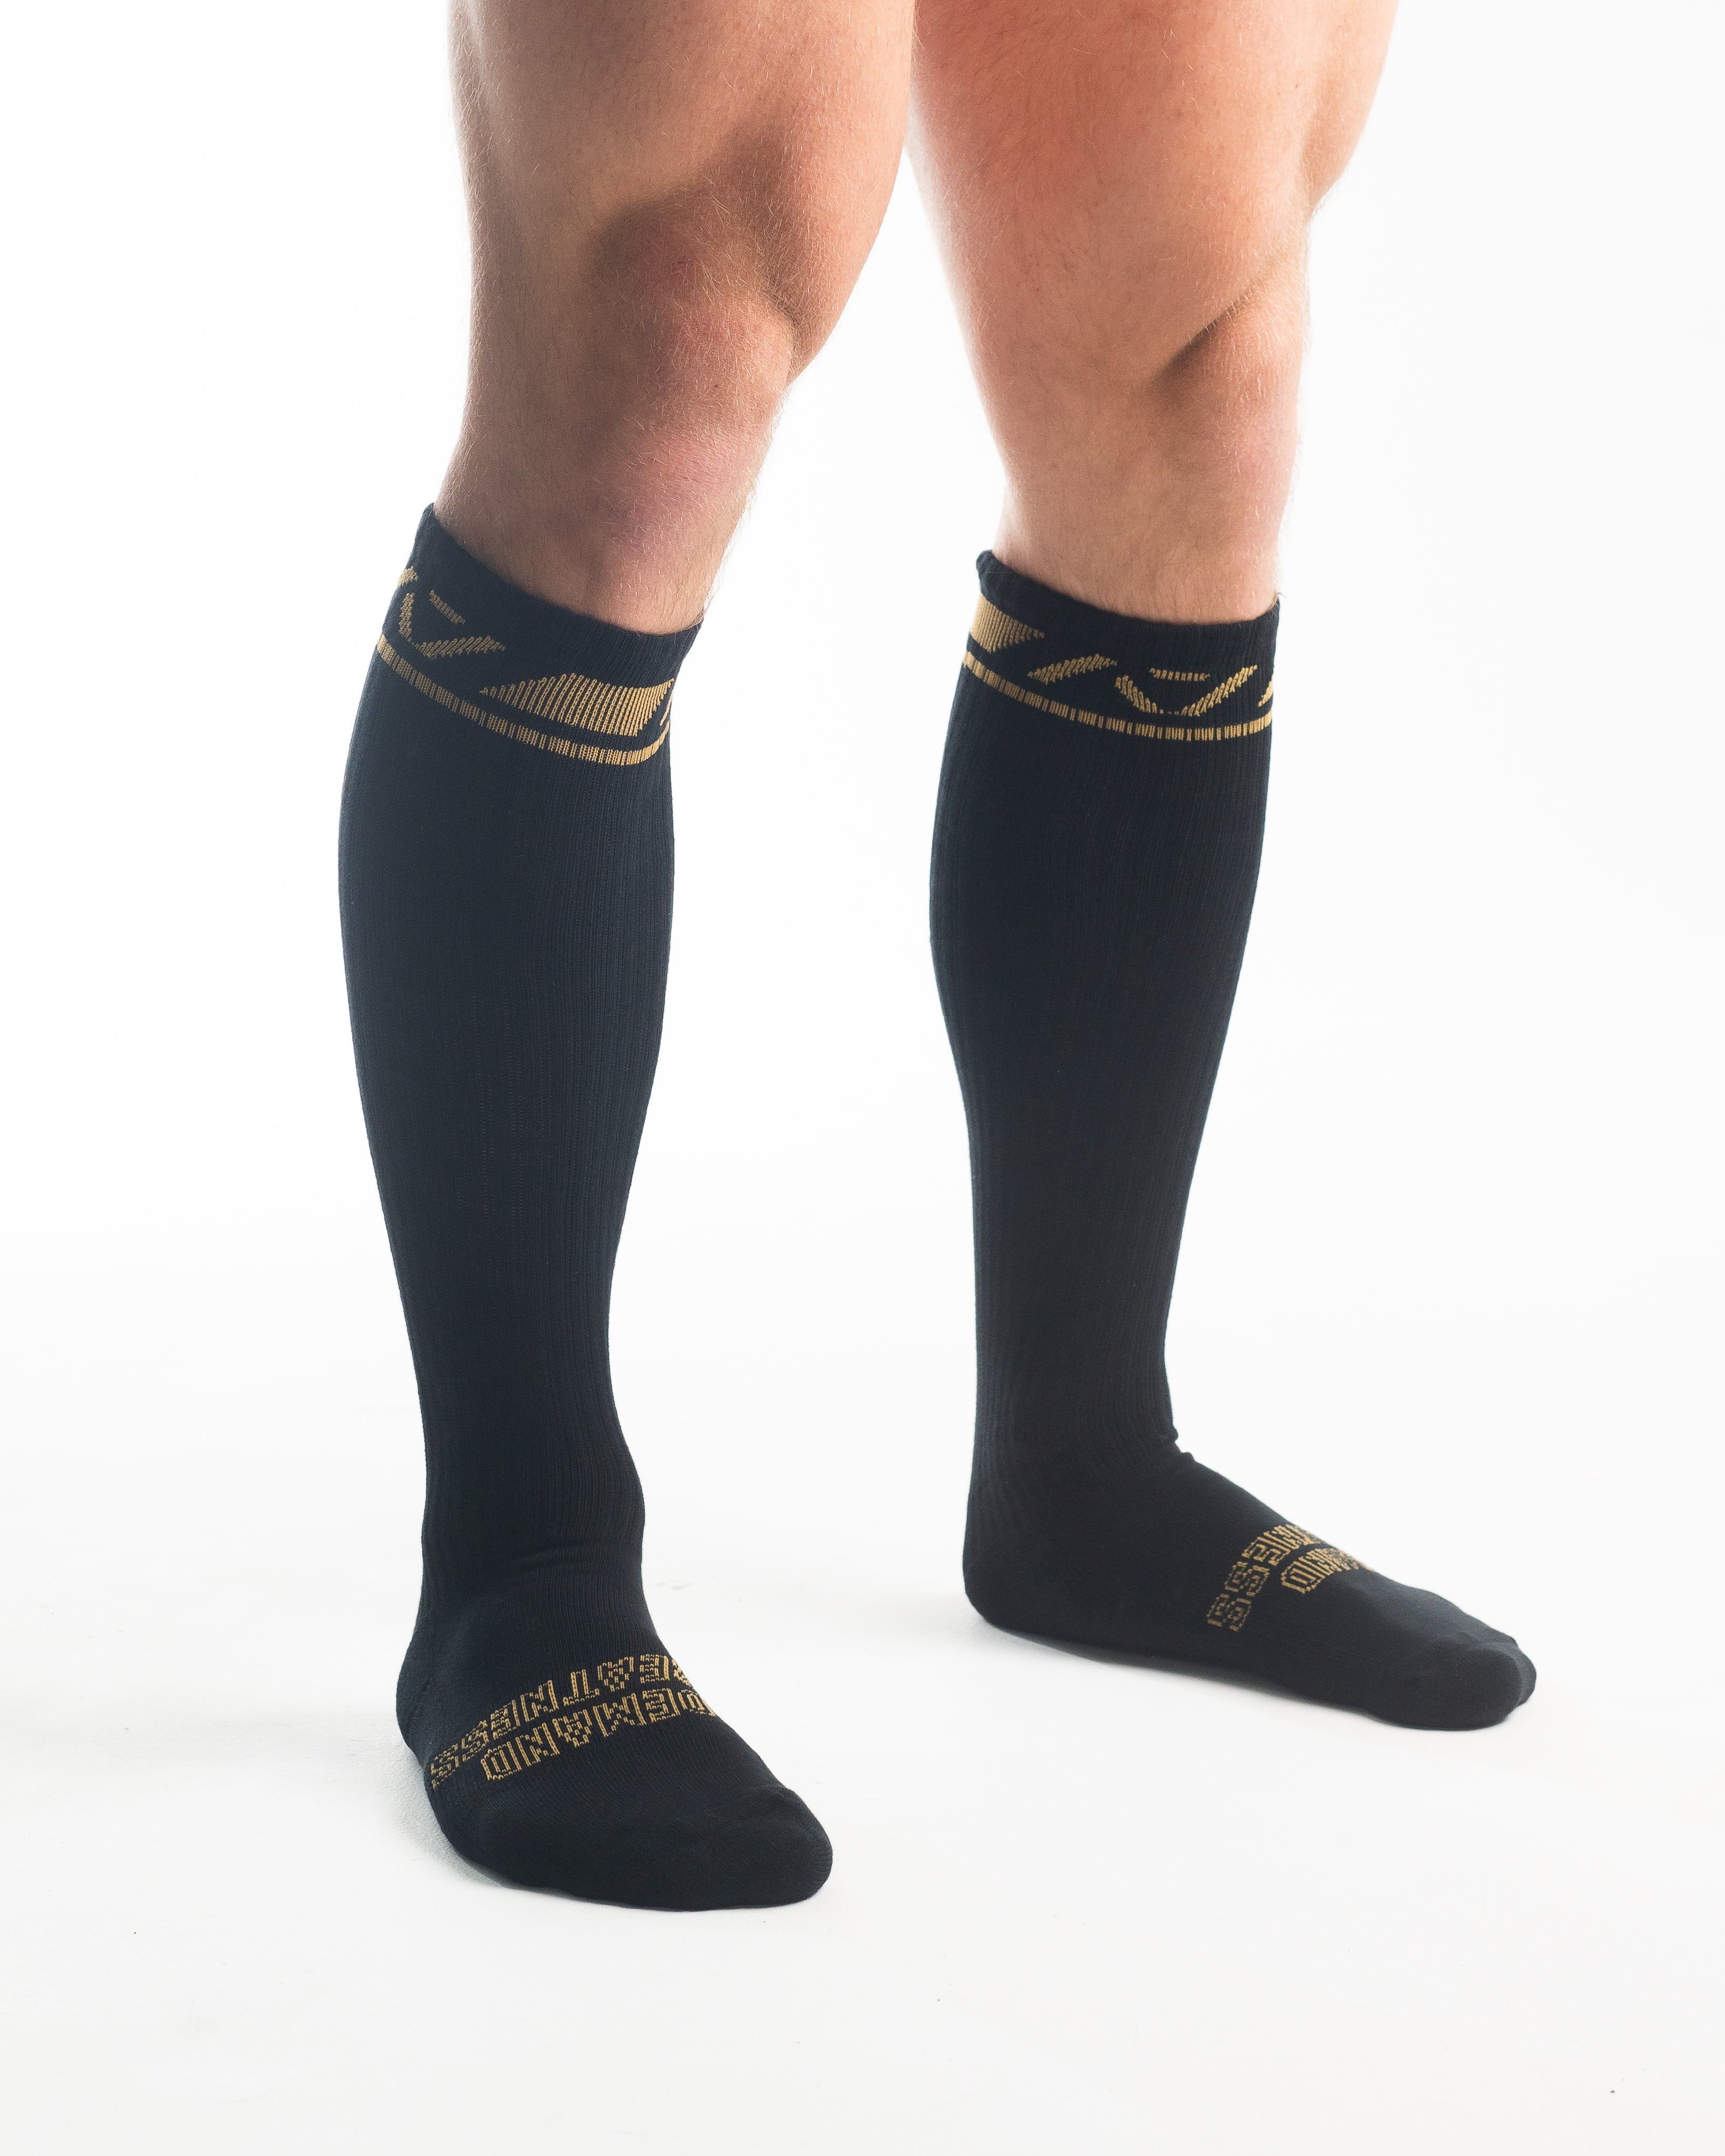 A7 Gold Standard Deadlift socks are designed specifically for pulls and keep your shins protected from scrapes. A7 deadlift socks are a perfect pair to wear in training or powerlifting competition. The IPF Approved Kit includes Powerlifting Singlet, A7 Meet Shirt, A7 Zebra Wrist Wraps, A7 Deadlift Socks, Hourglass Knee Sleeves (Stiff Knee Sleeves and Rigor Mortis Knee Sleeves). Genouillères powerlifting shipping to France, Spain, Ireland, Germany, Italy, Sweden and EU.